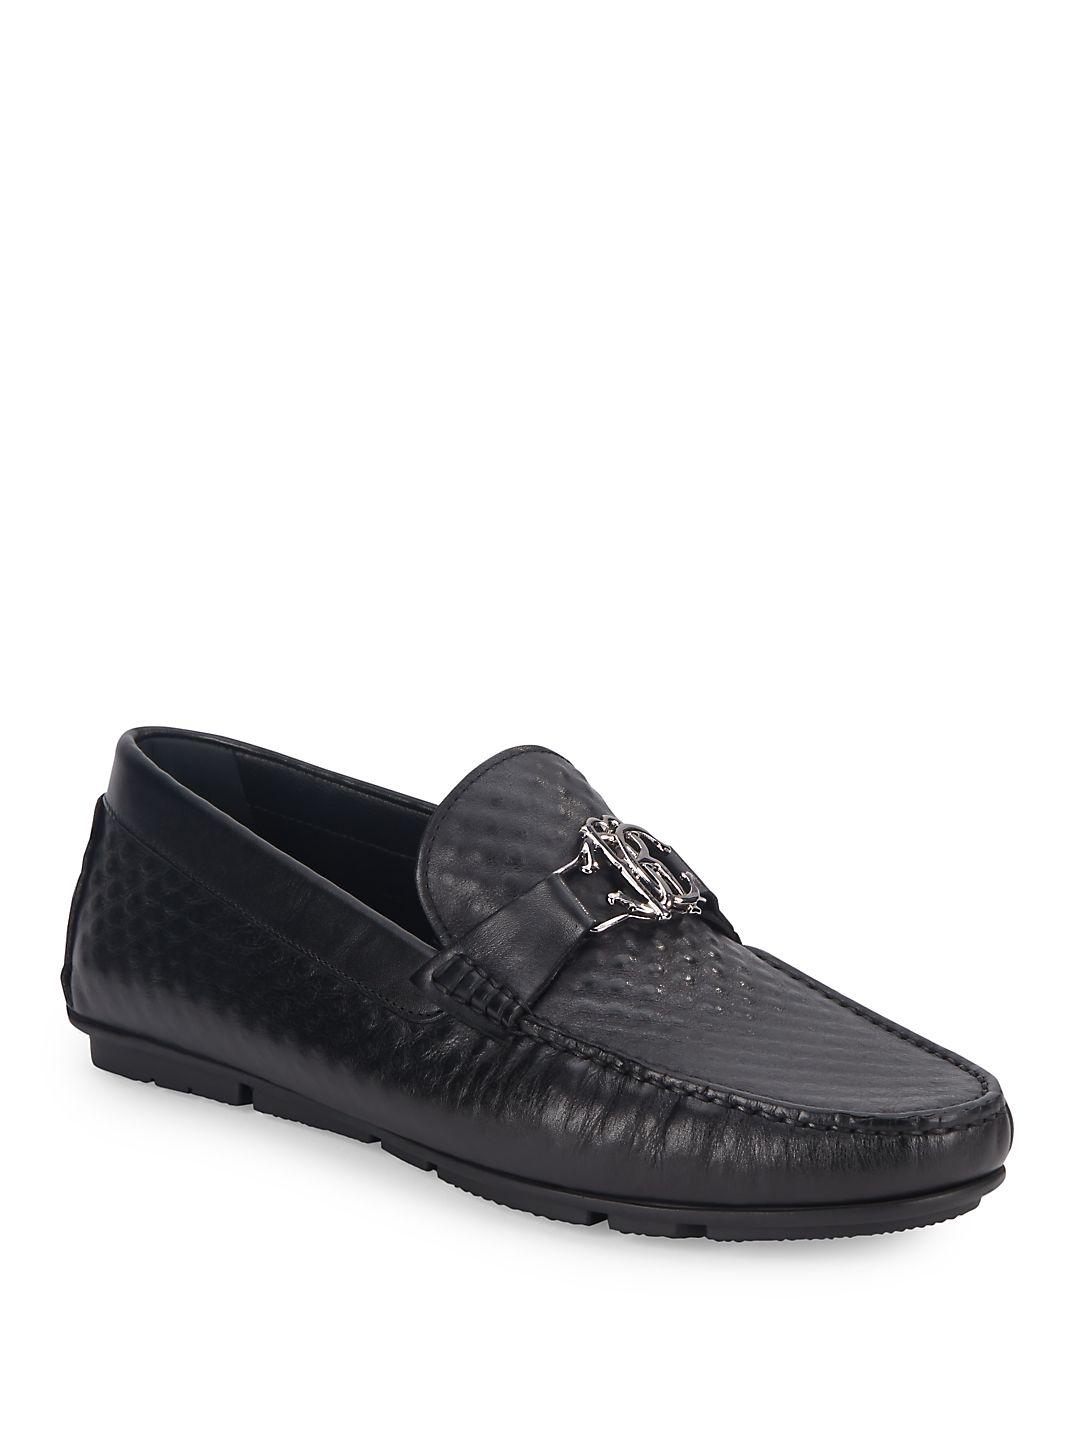 Roberto Cavalli Textured Leather Loafers in Black for Men - Lyst